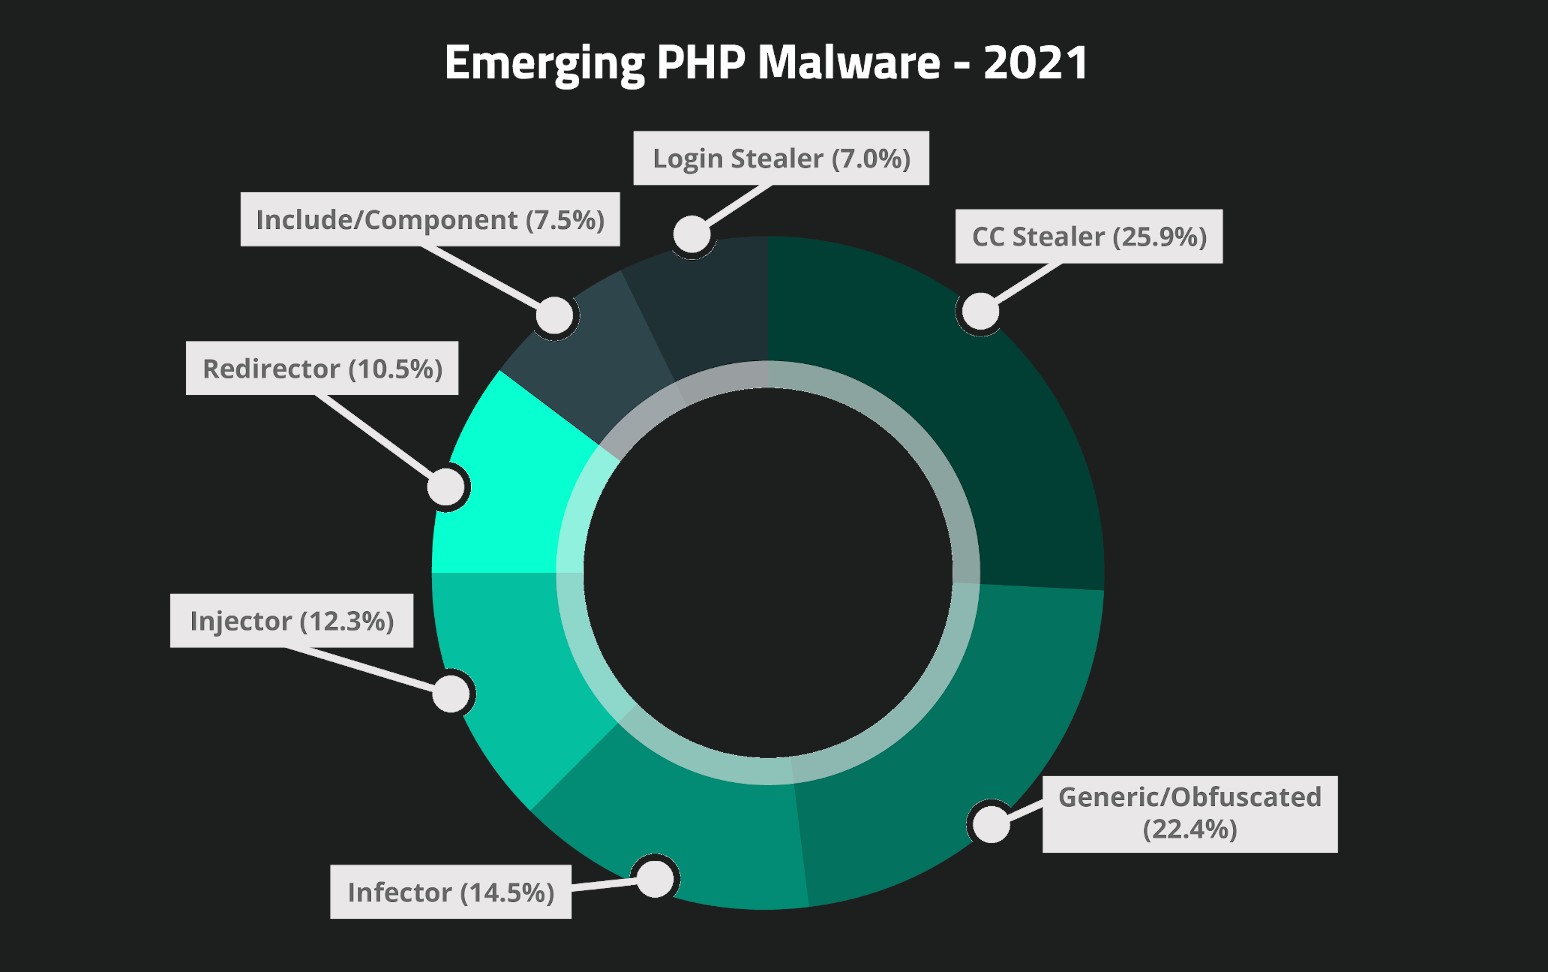 Emerging PHP malware from our 2021 Hacked Website Report